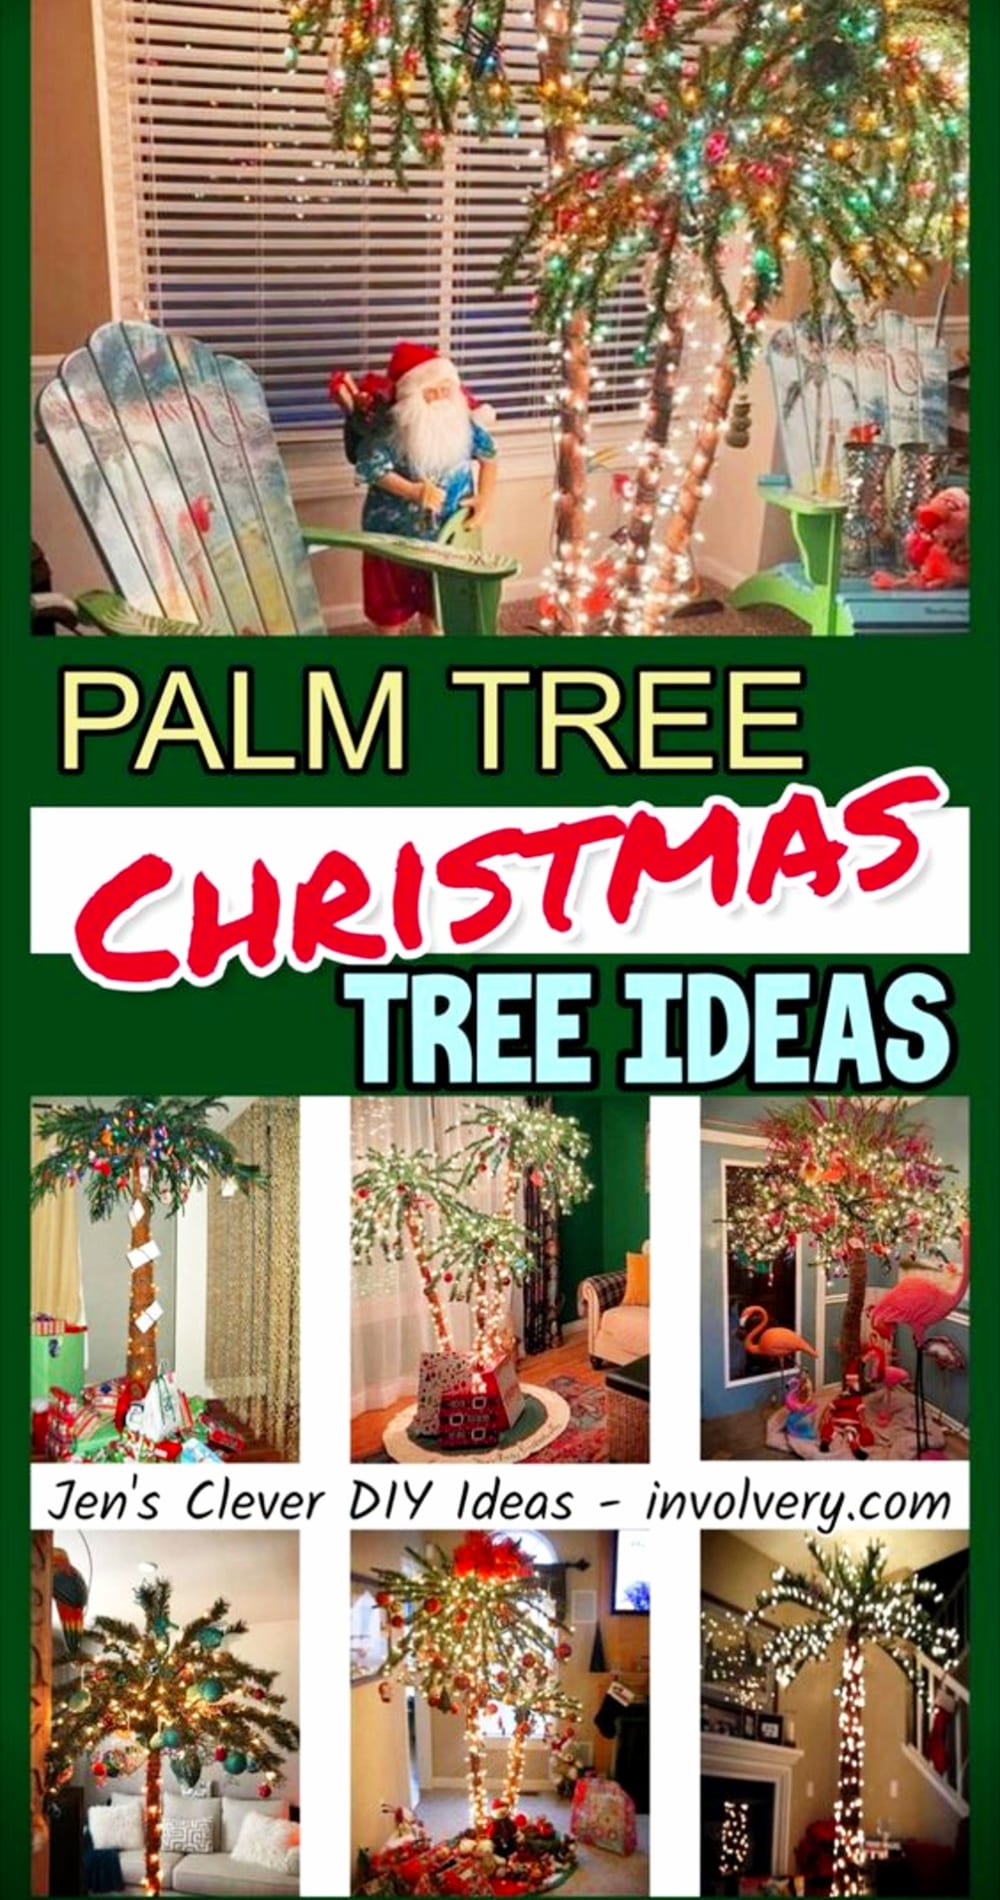 palm tree Christmas tree ideas - what a unique alternative to a traditional Christmas tree!